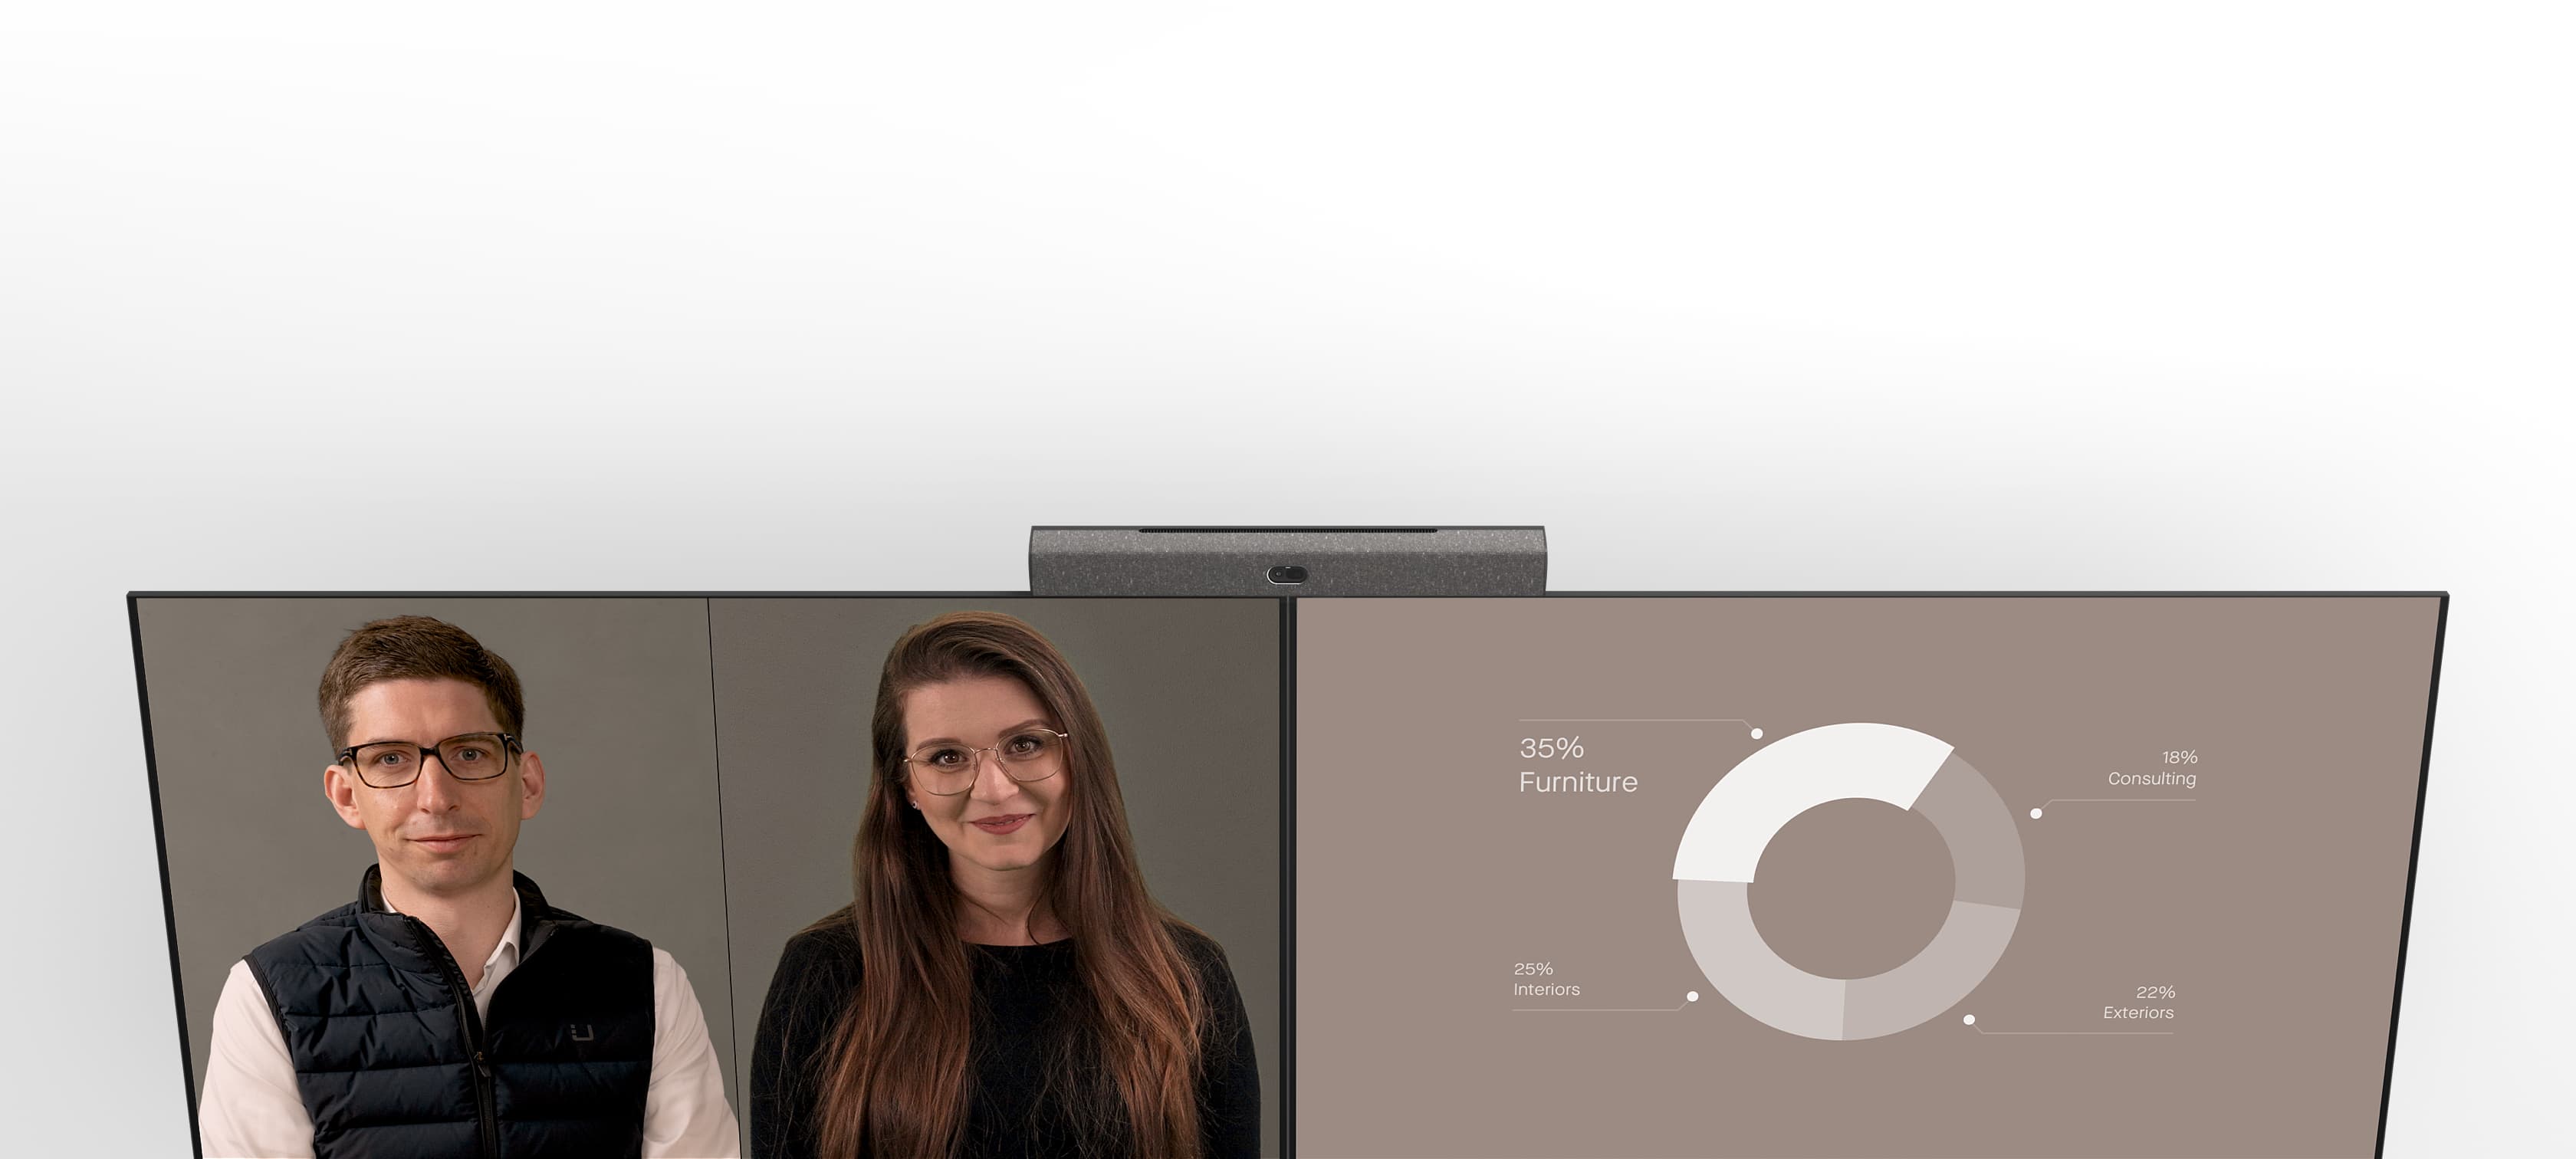 Neat Bar Generation 2 mounted on top of two 4K screens. The screen on the left shows two people in a meeting; the screen on the right shows a graph shared in the meeting.